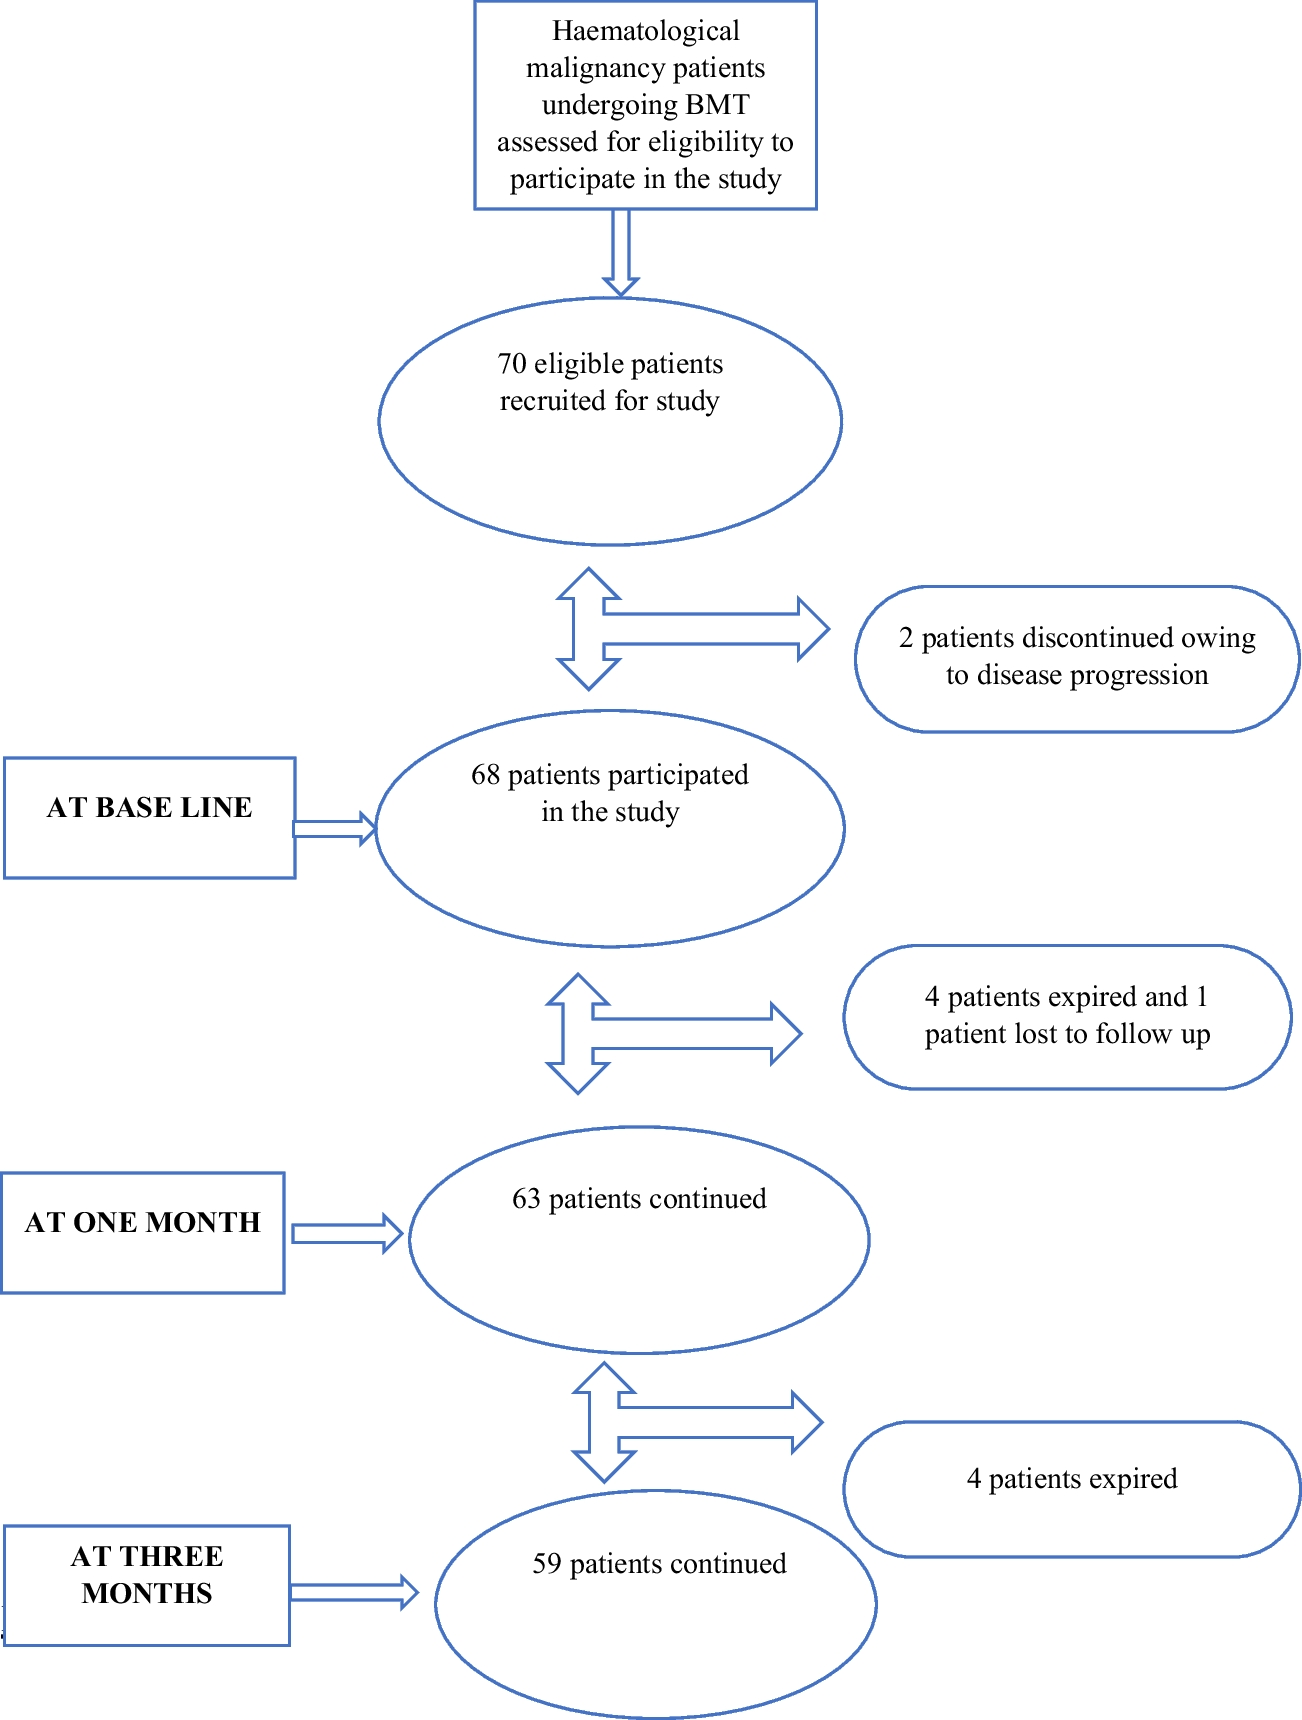 Quality of life and symptom burden in hematological cancer patients receiving hematopoietic stem cell transplantation: an observational study at Regional Cancer Centre, India